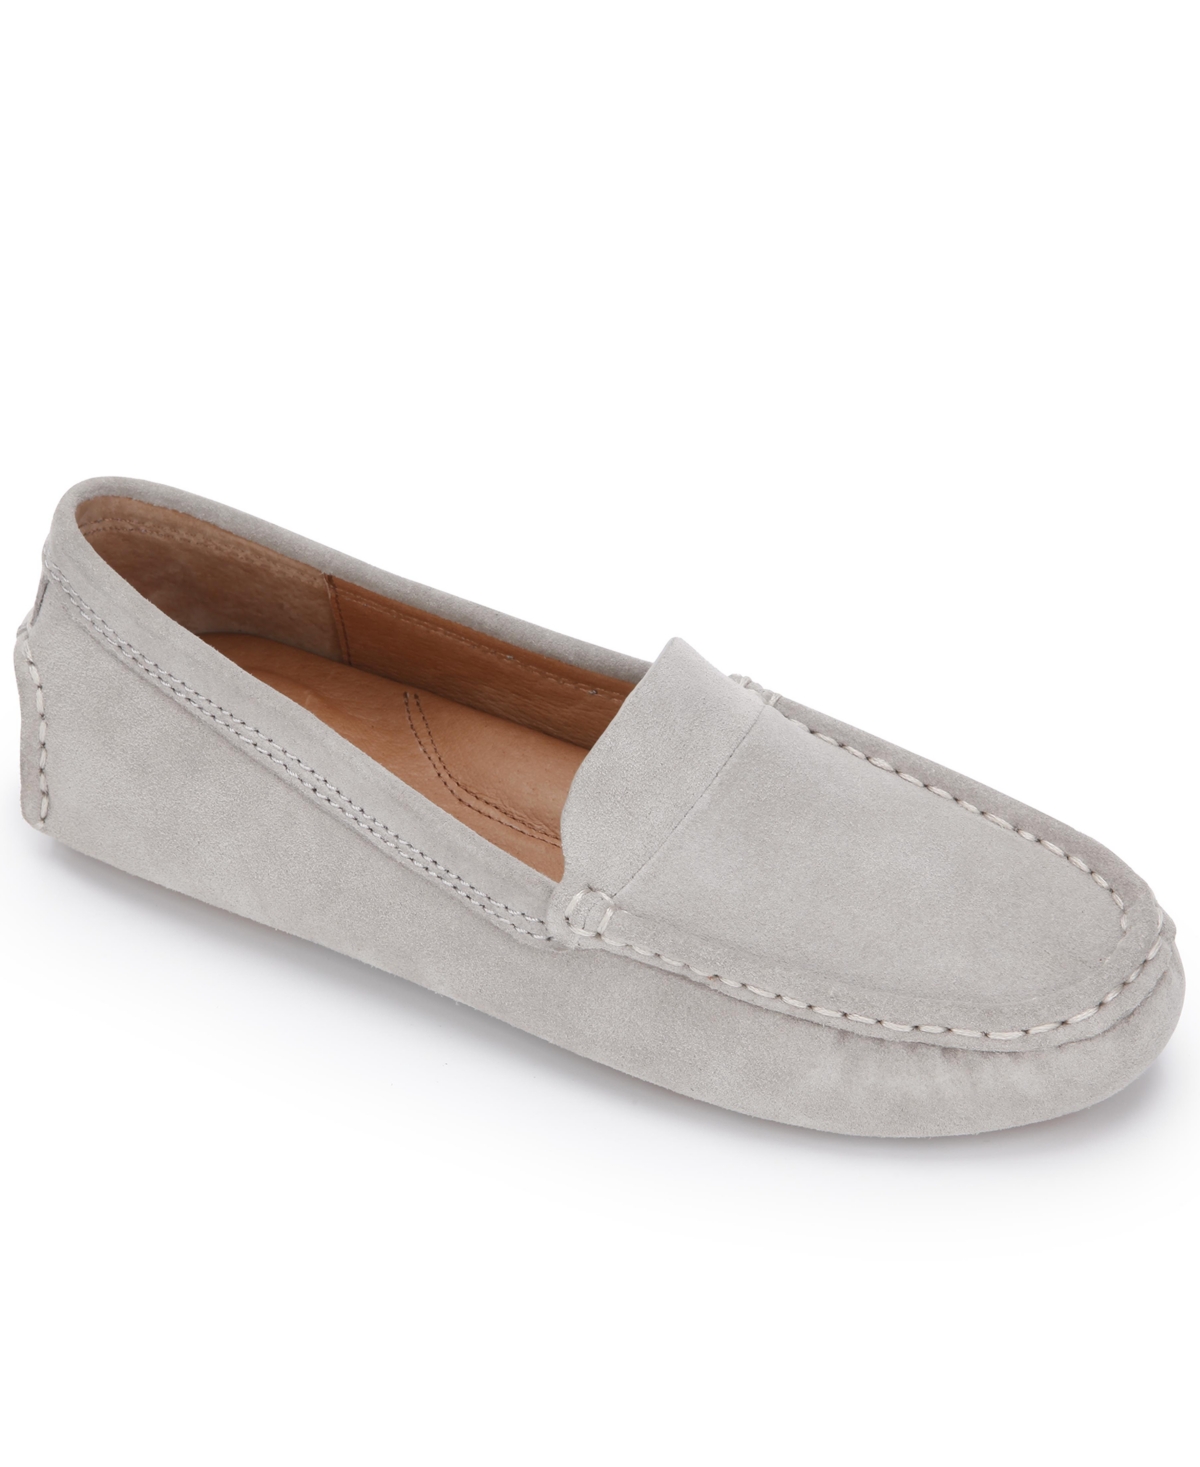 Gentle Souls By Kenneth Cole Women's Mina Driver Loafer Flats Women's Shoes